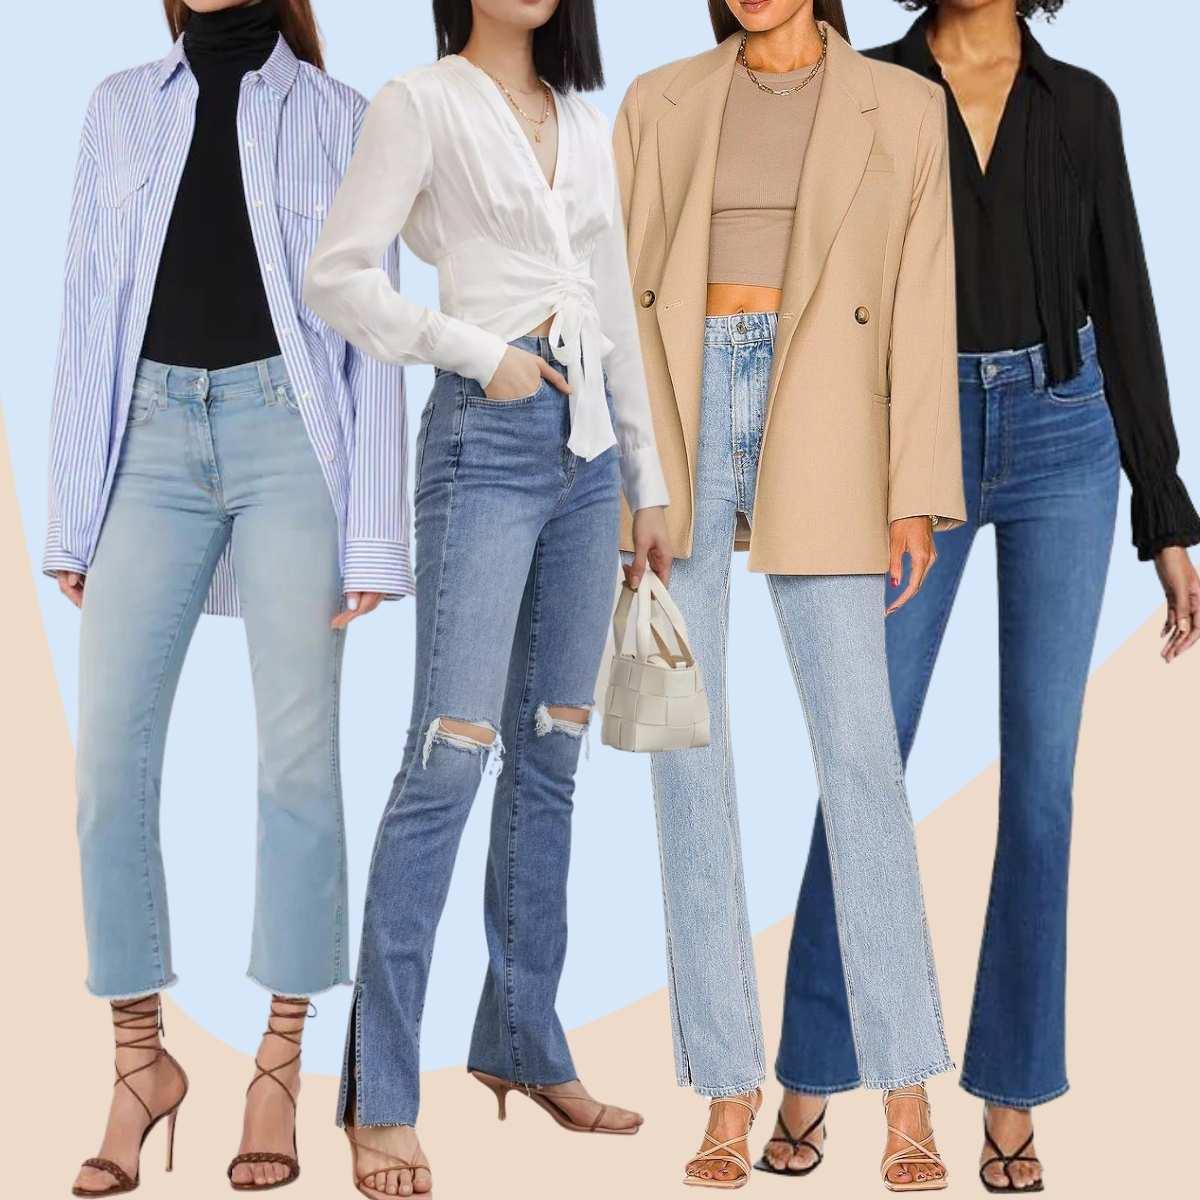 Collage of 4 women wearing pumps with bootcut jeans outfits.